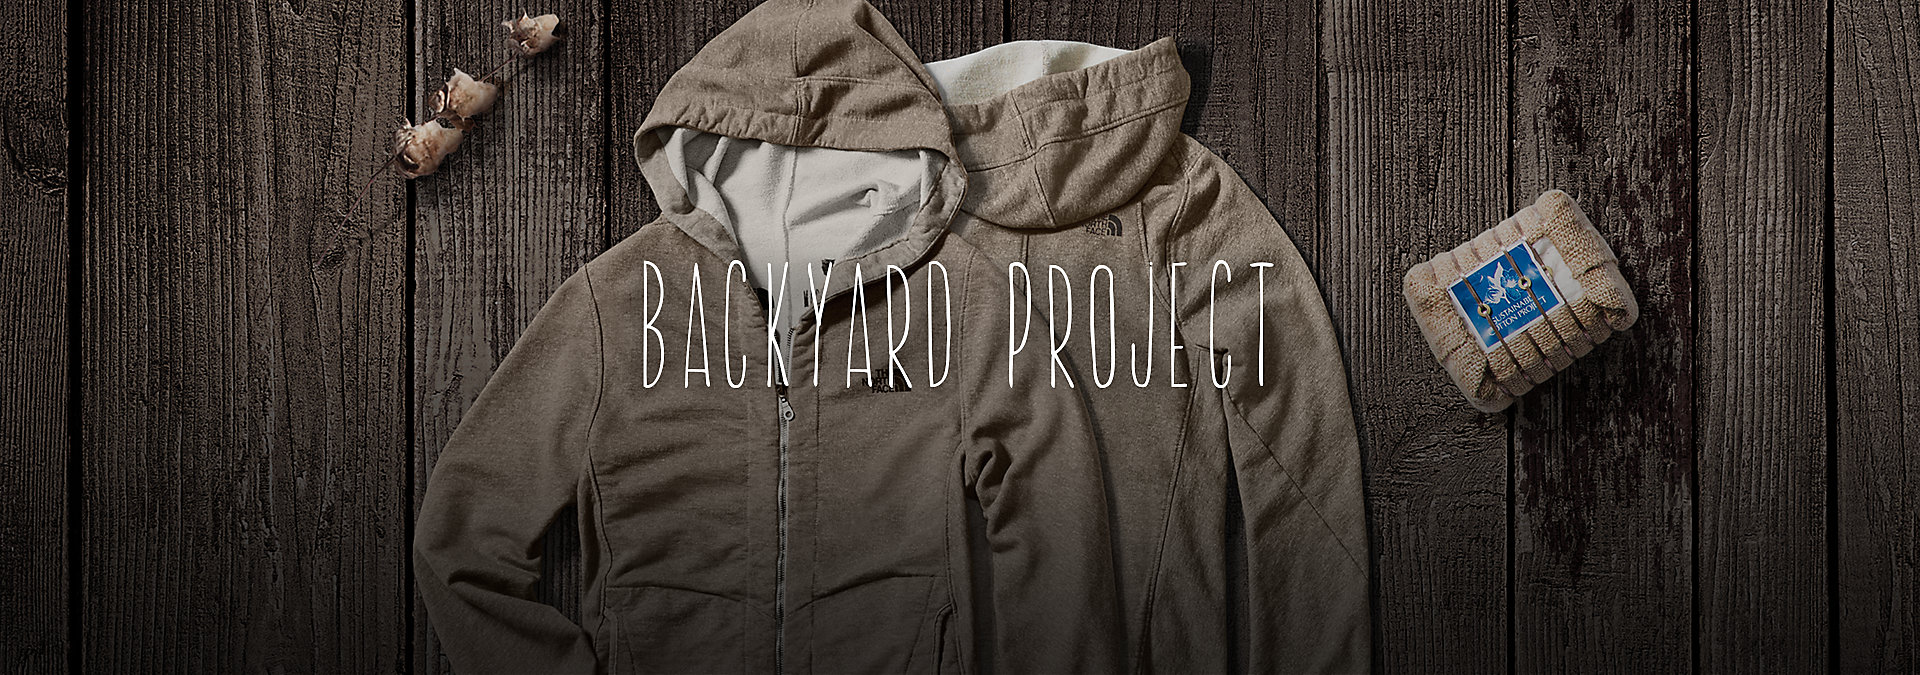 The North Face Backyard Project launched in 2014. © The North Face